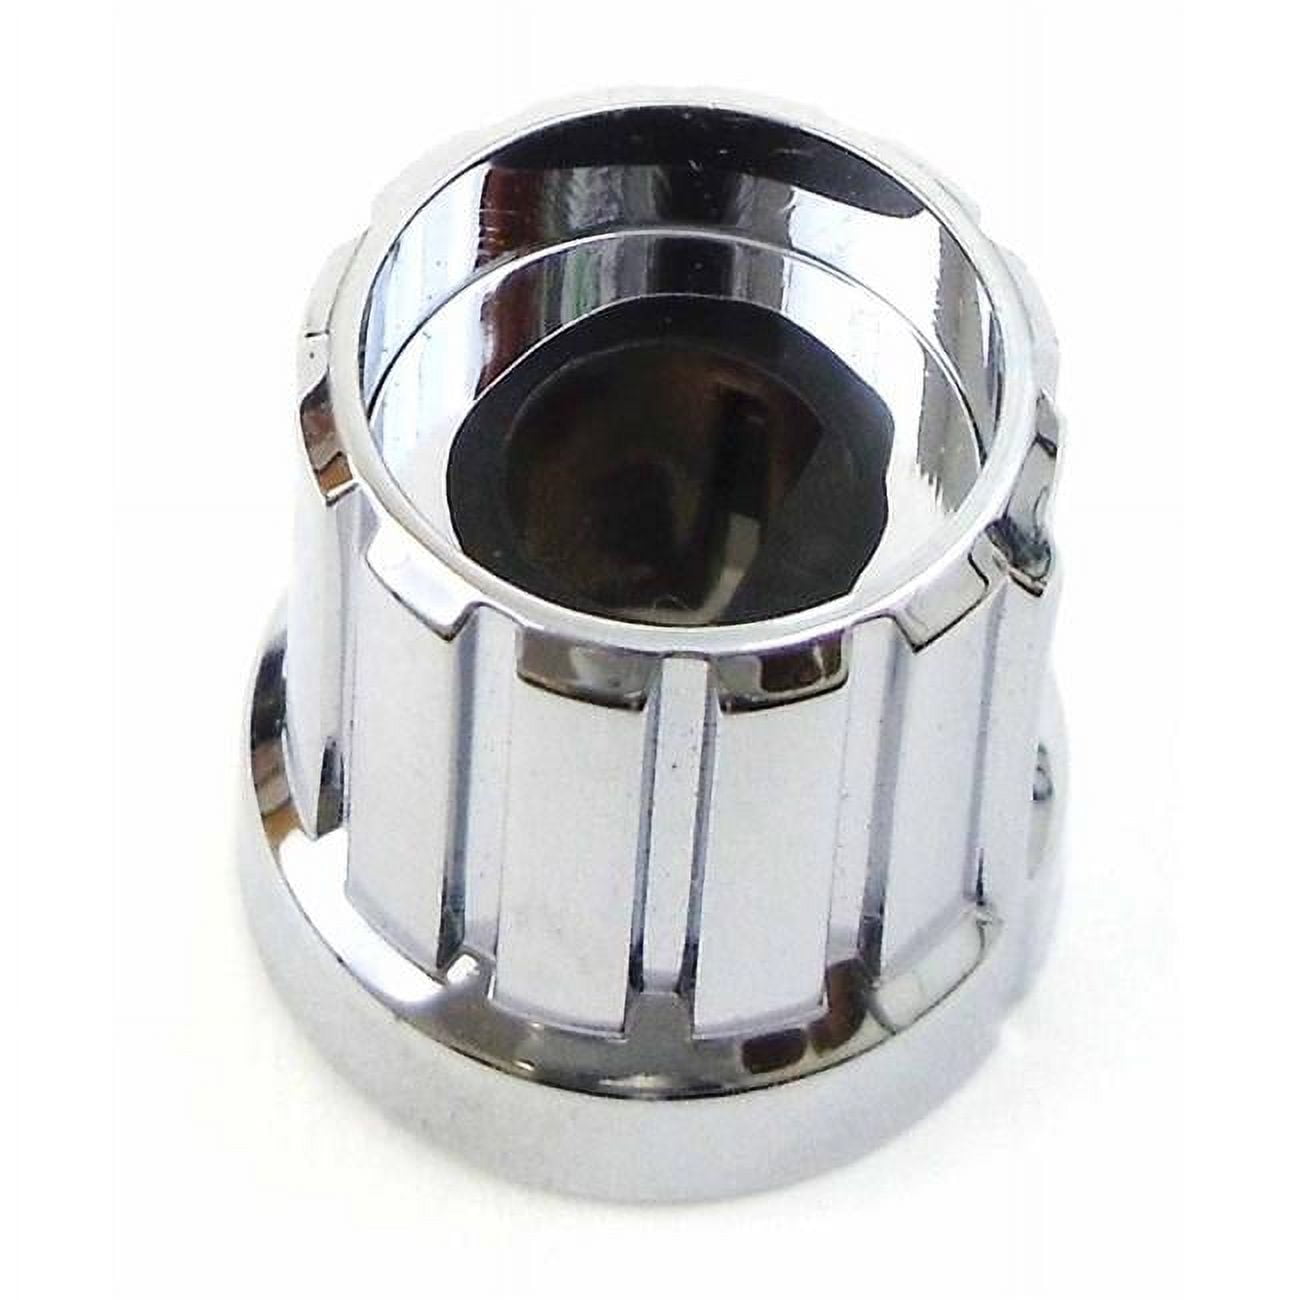 751029N001 Outer Knob for All CB Radios with Dual Knobs -  Cobra